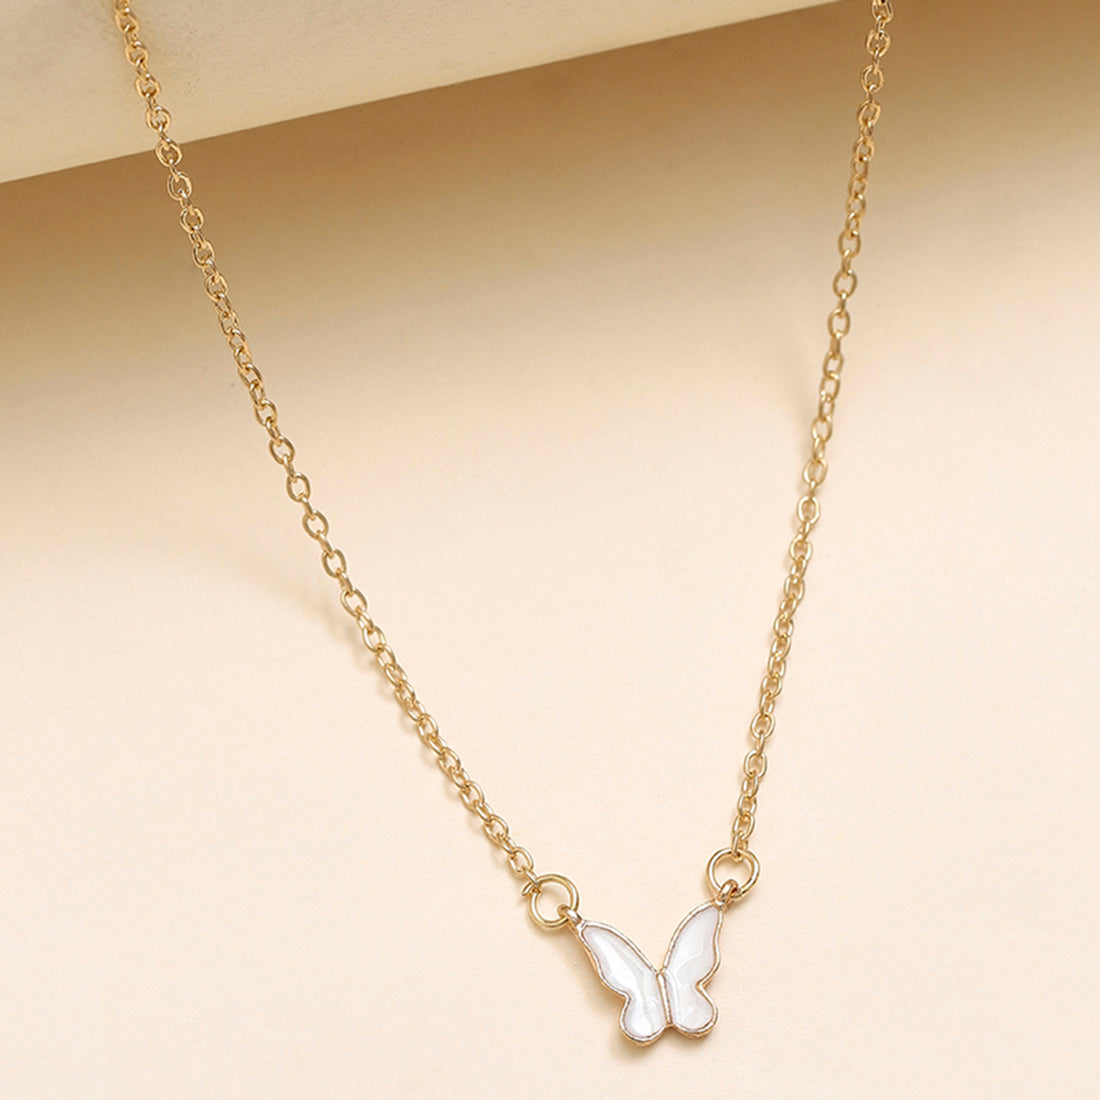 Women's Beautiful Open Winged Butterly Charm Gold Plated Necklace - Voylla